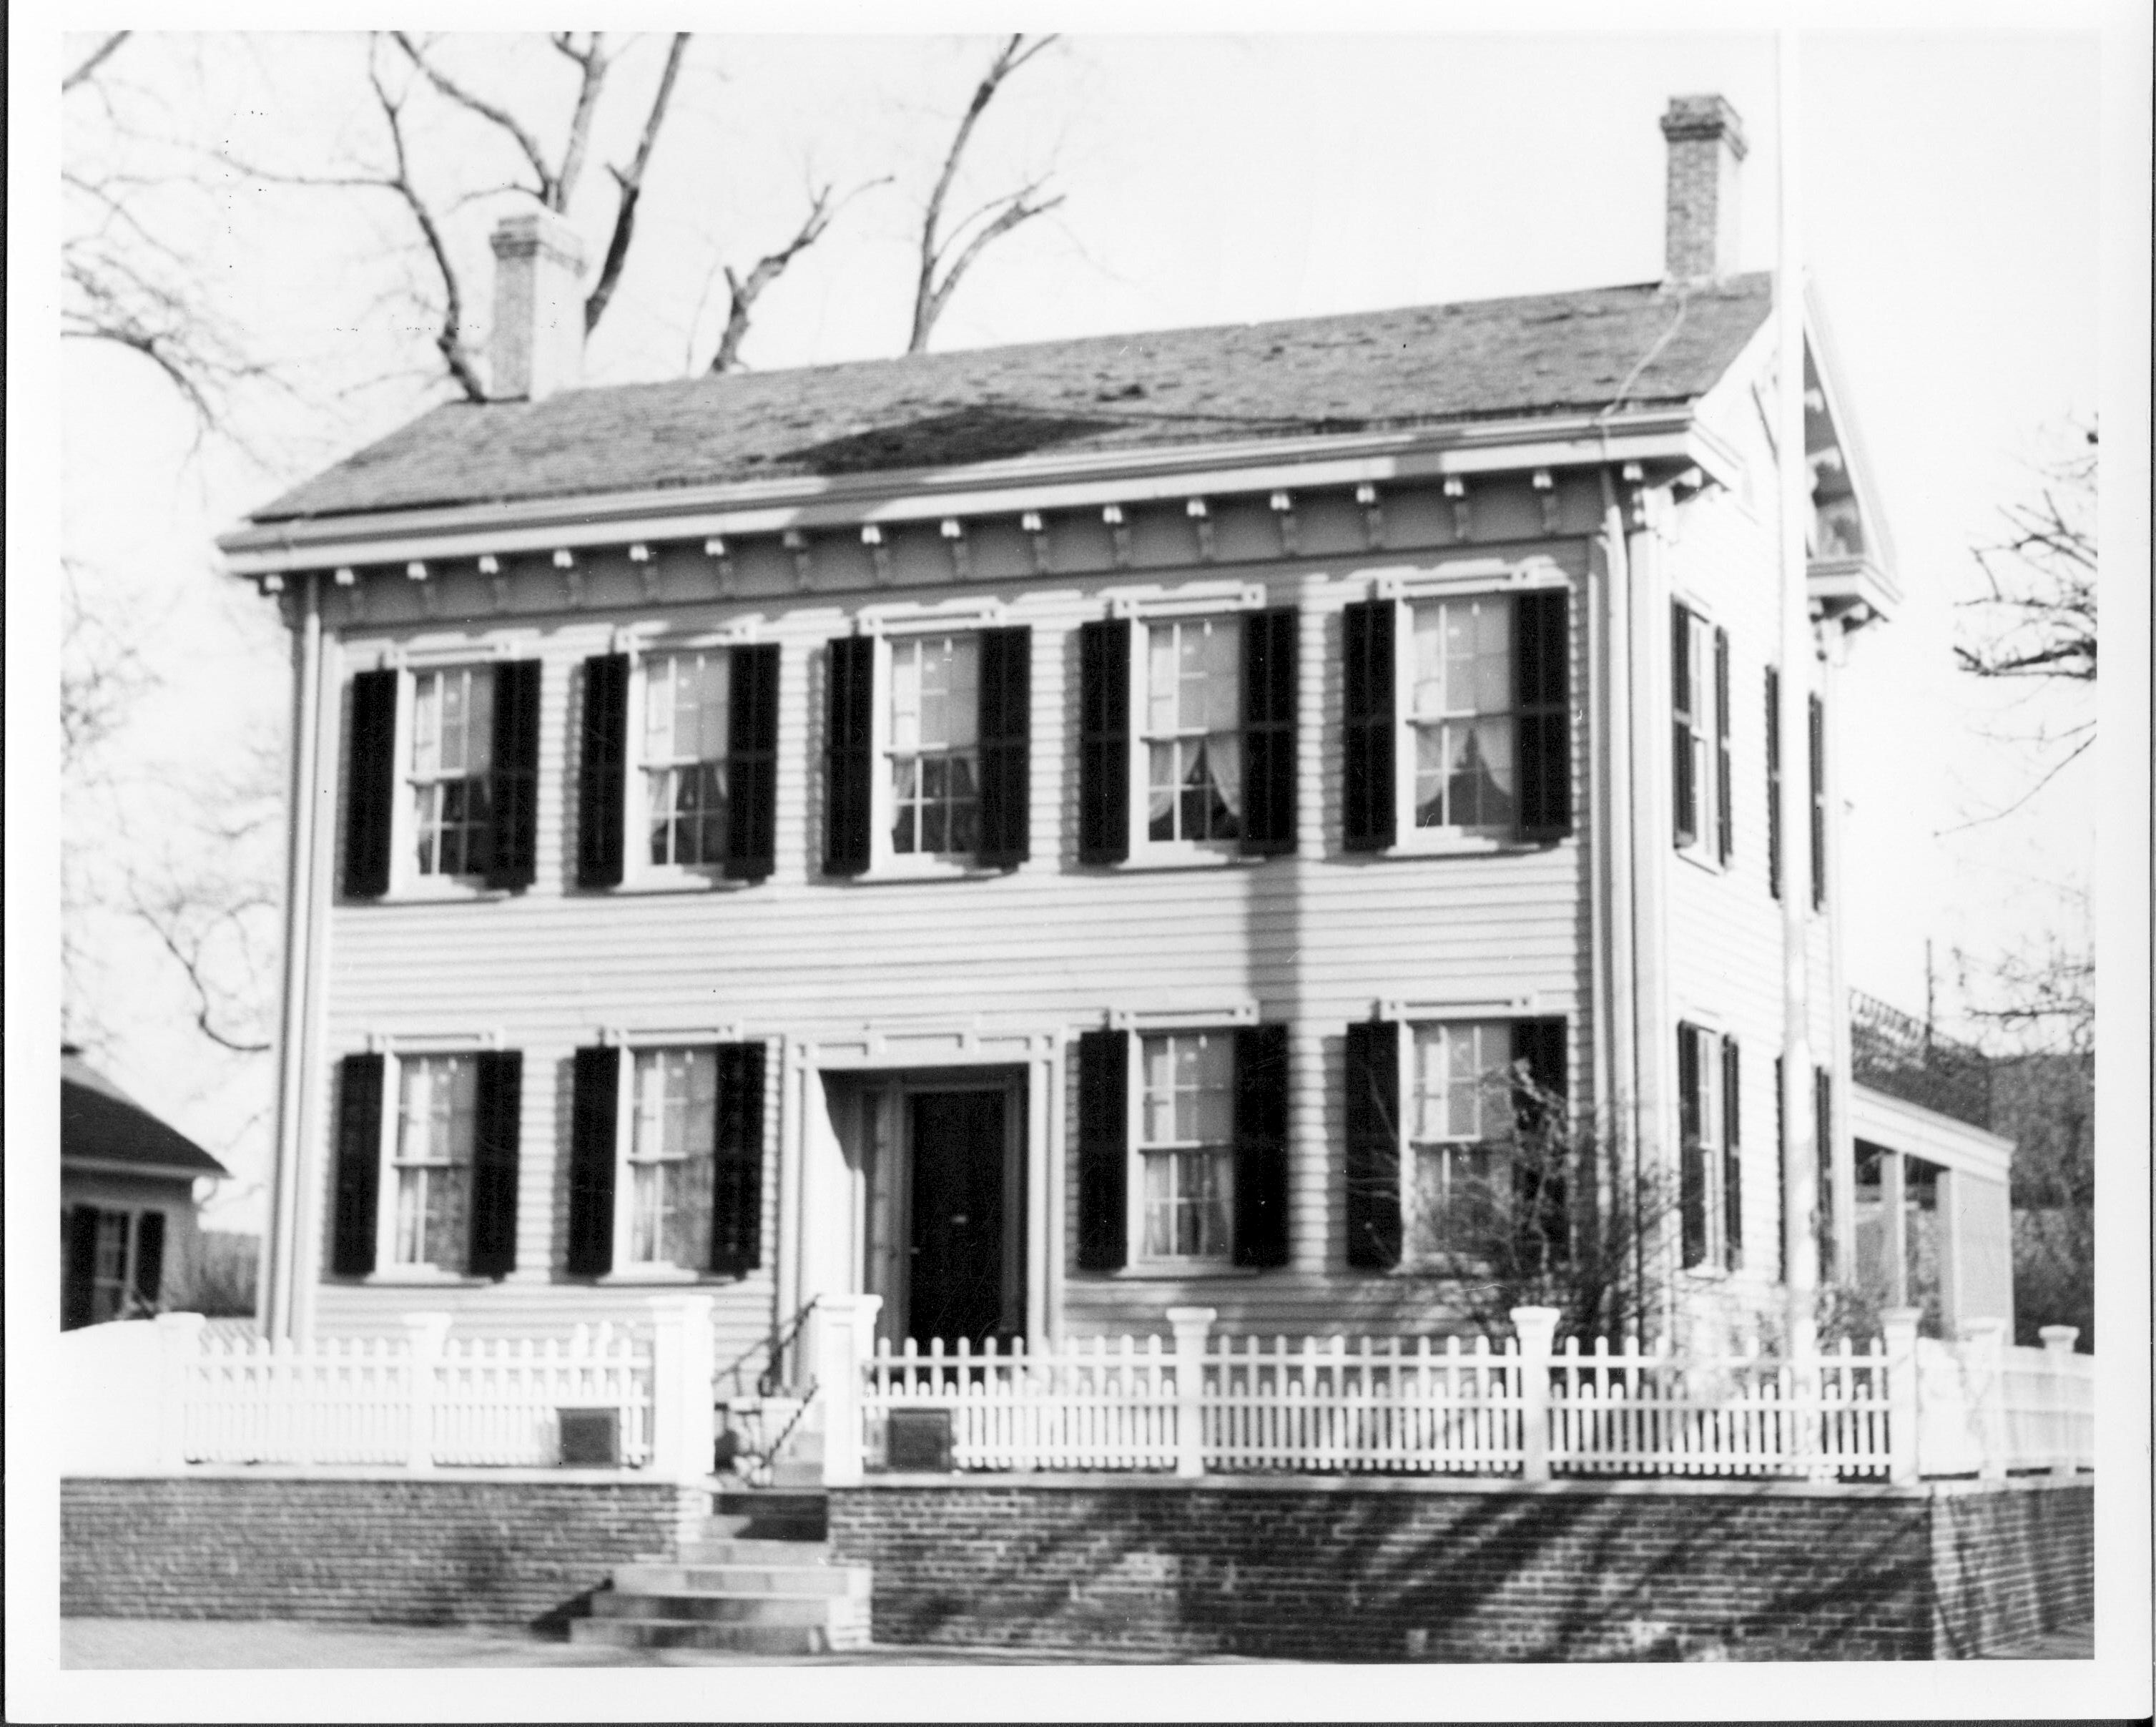 Lincoln Home west (front) elevation. Corneau House on far left. Lincoln Barn just visible behind Lincoln Home on far right.  Square commemorative plaques on either side of open gate. House appears to be painted white. Looking East/Northeast from 8th Street Lincoln Home, Corneau, Lincoln Barn, painted white